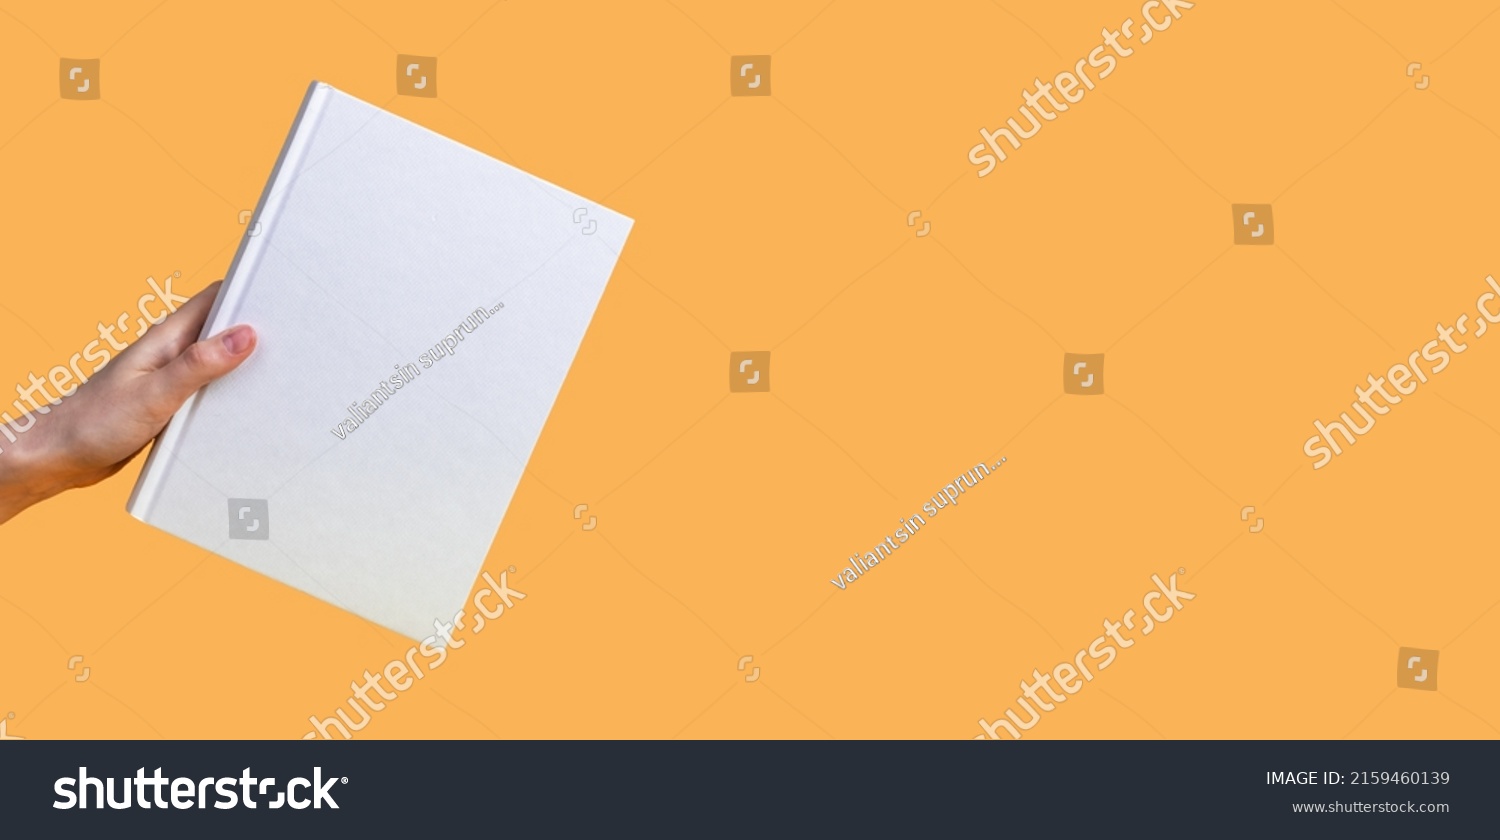 Banner with hand holding book mockup on orange background. Education, reading hobby, wisdom, intellectual development concept. Copy space. High quality photo #2159460139